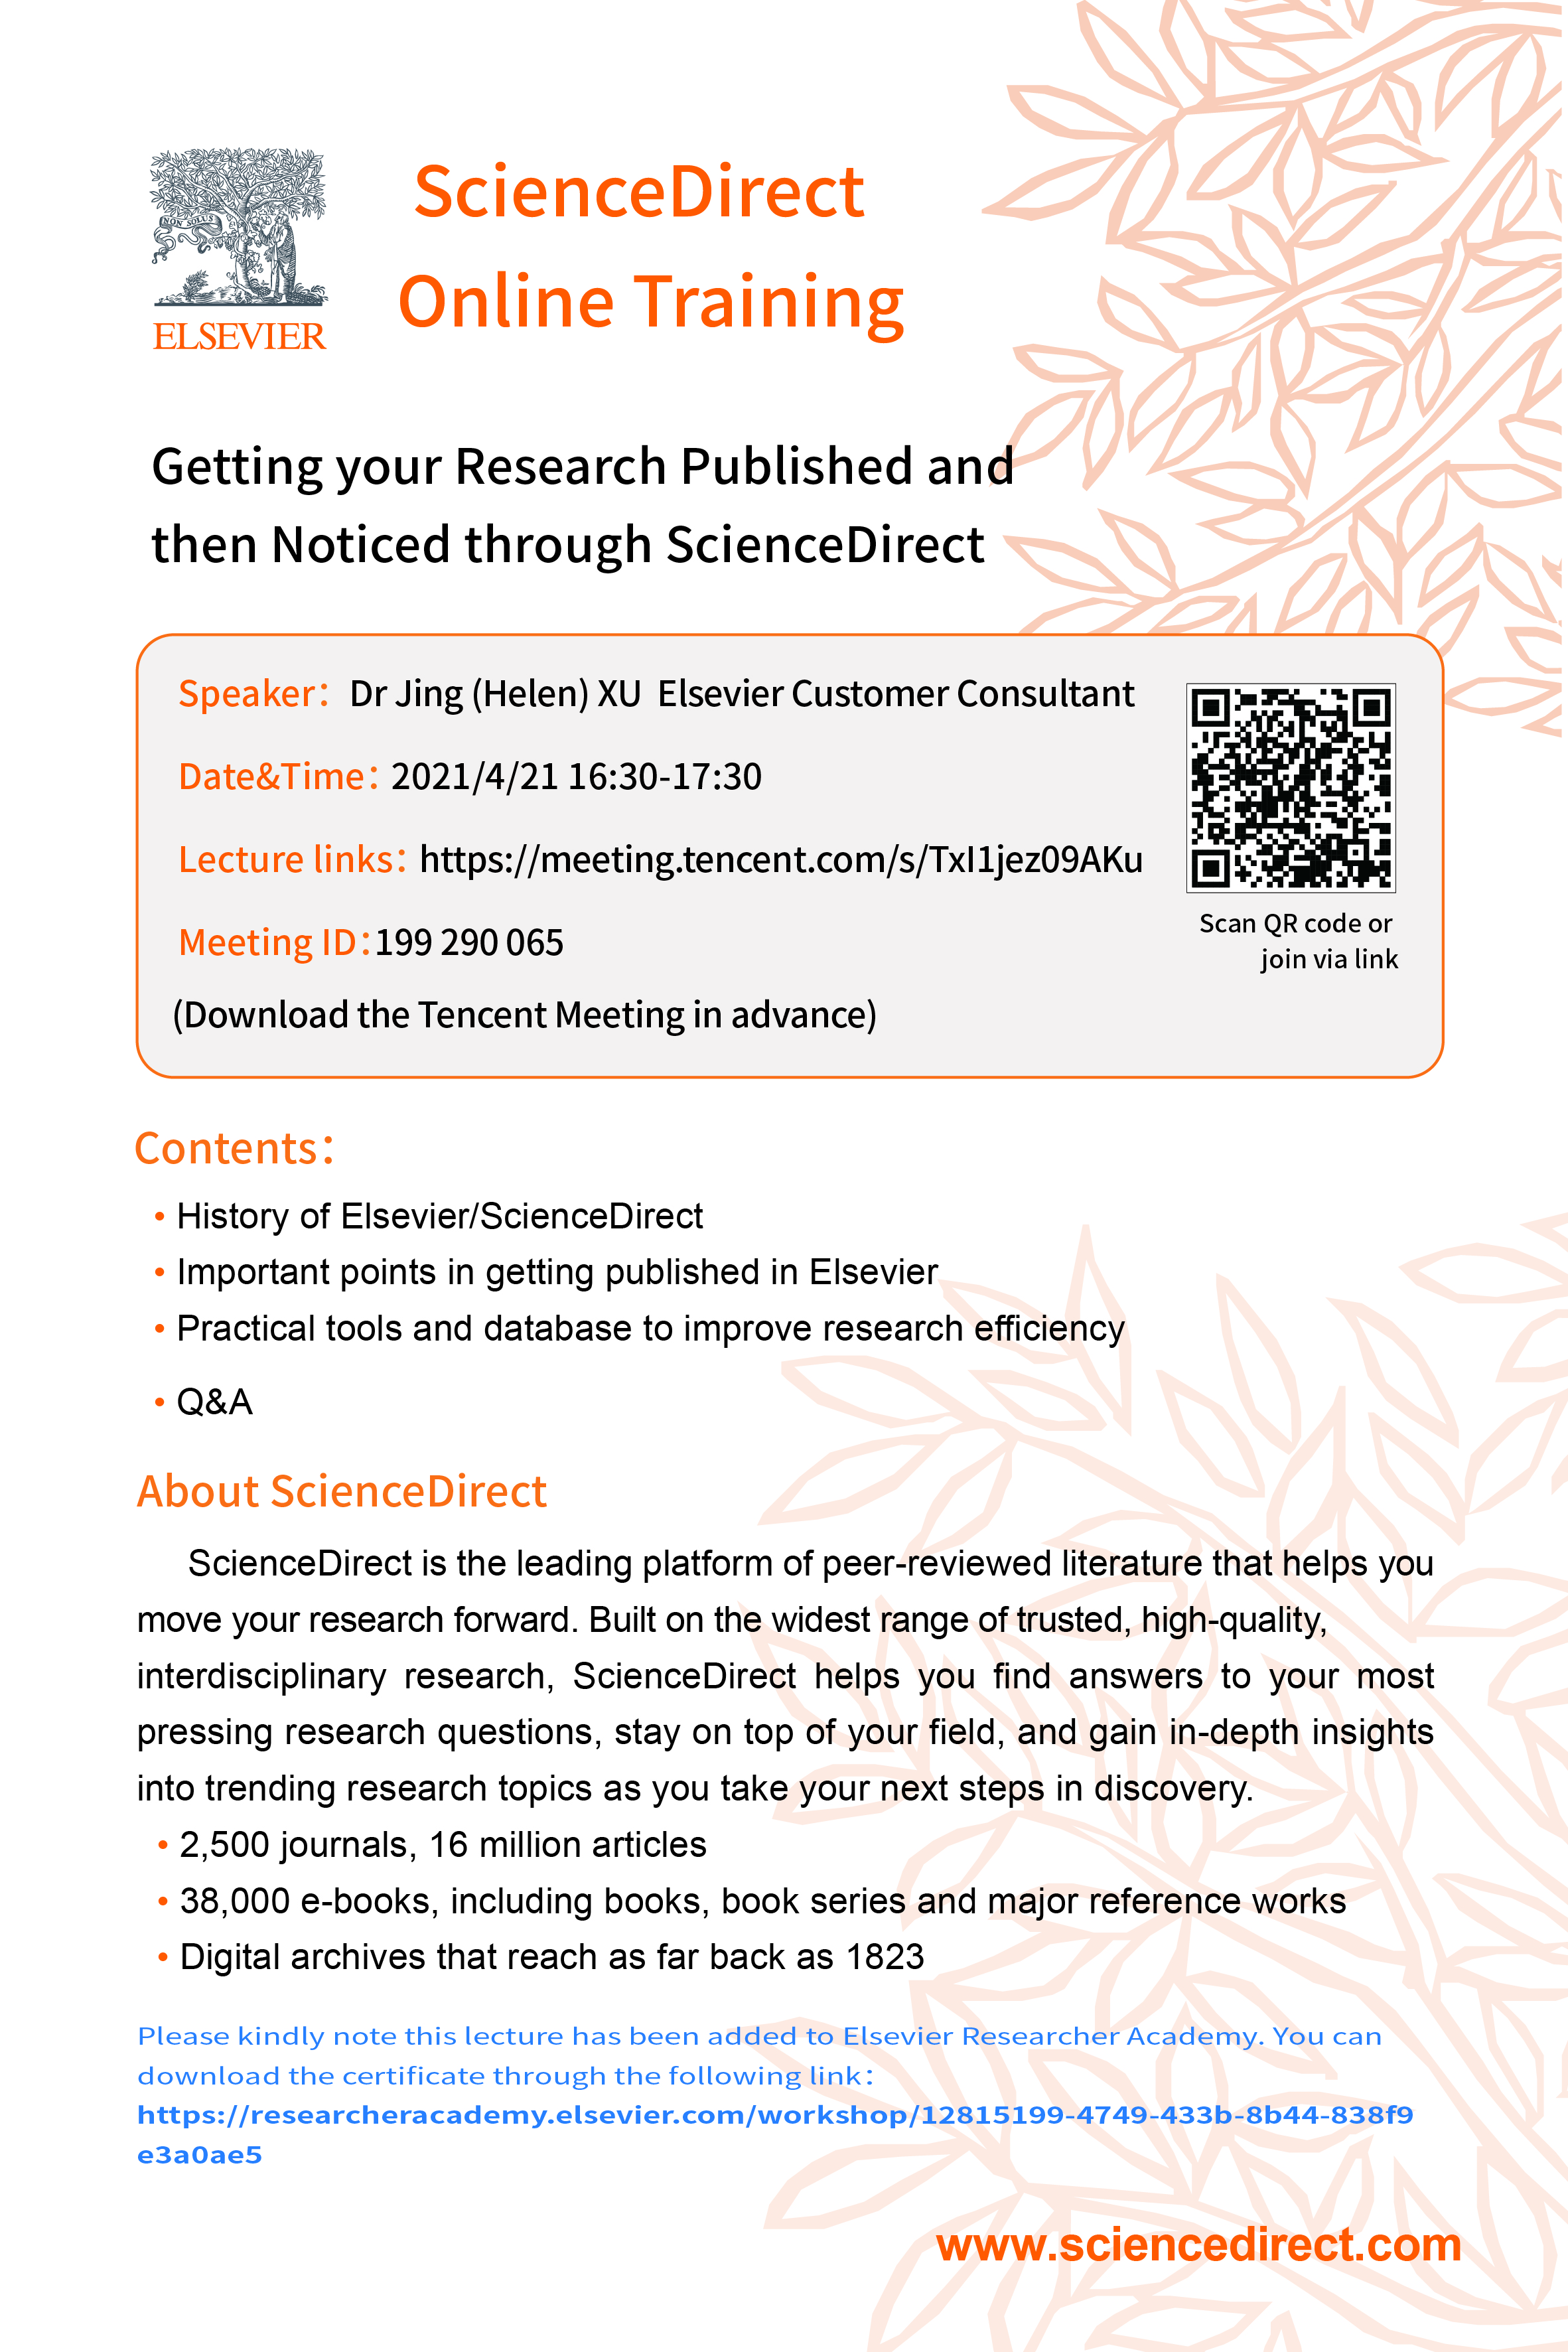 Getting your Research Published and then Noticed through ScienceDirect (English Session)